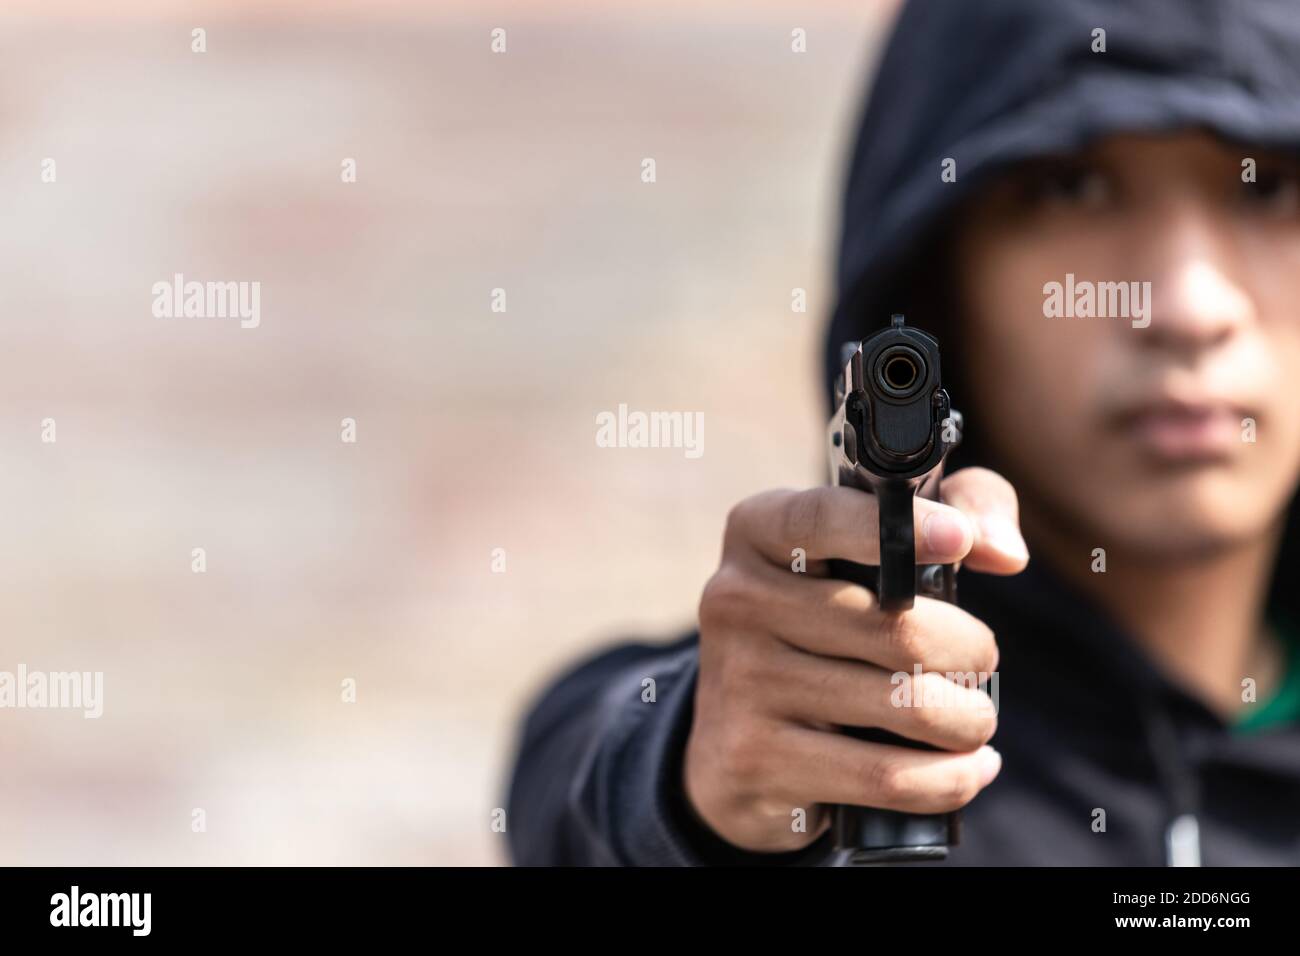 The gangster aimed a gun at the camera. A thief pointing a gun at the target, selective focus on the front gun, Blurred focus. Stock Photo